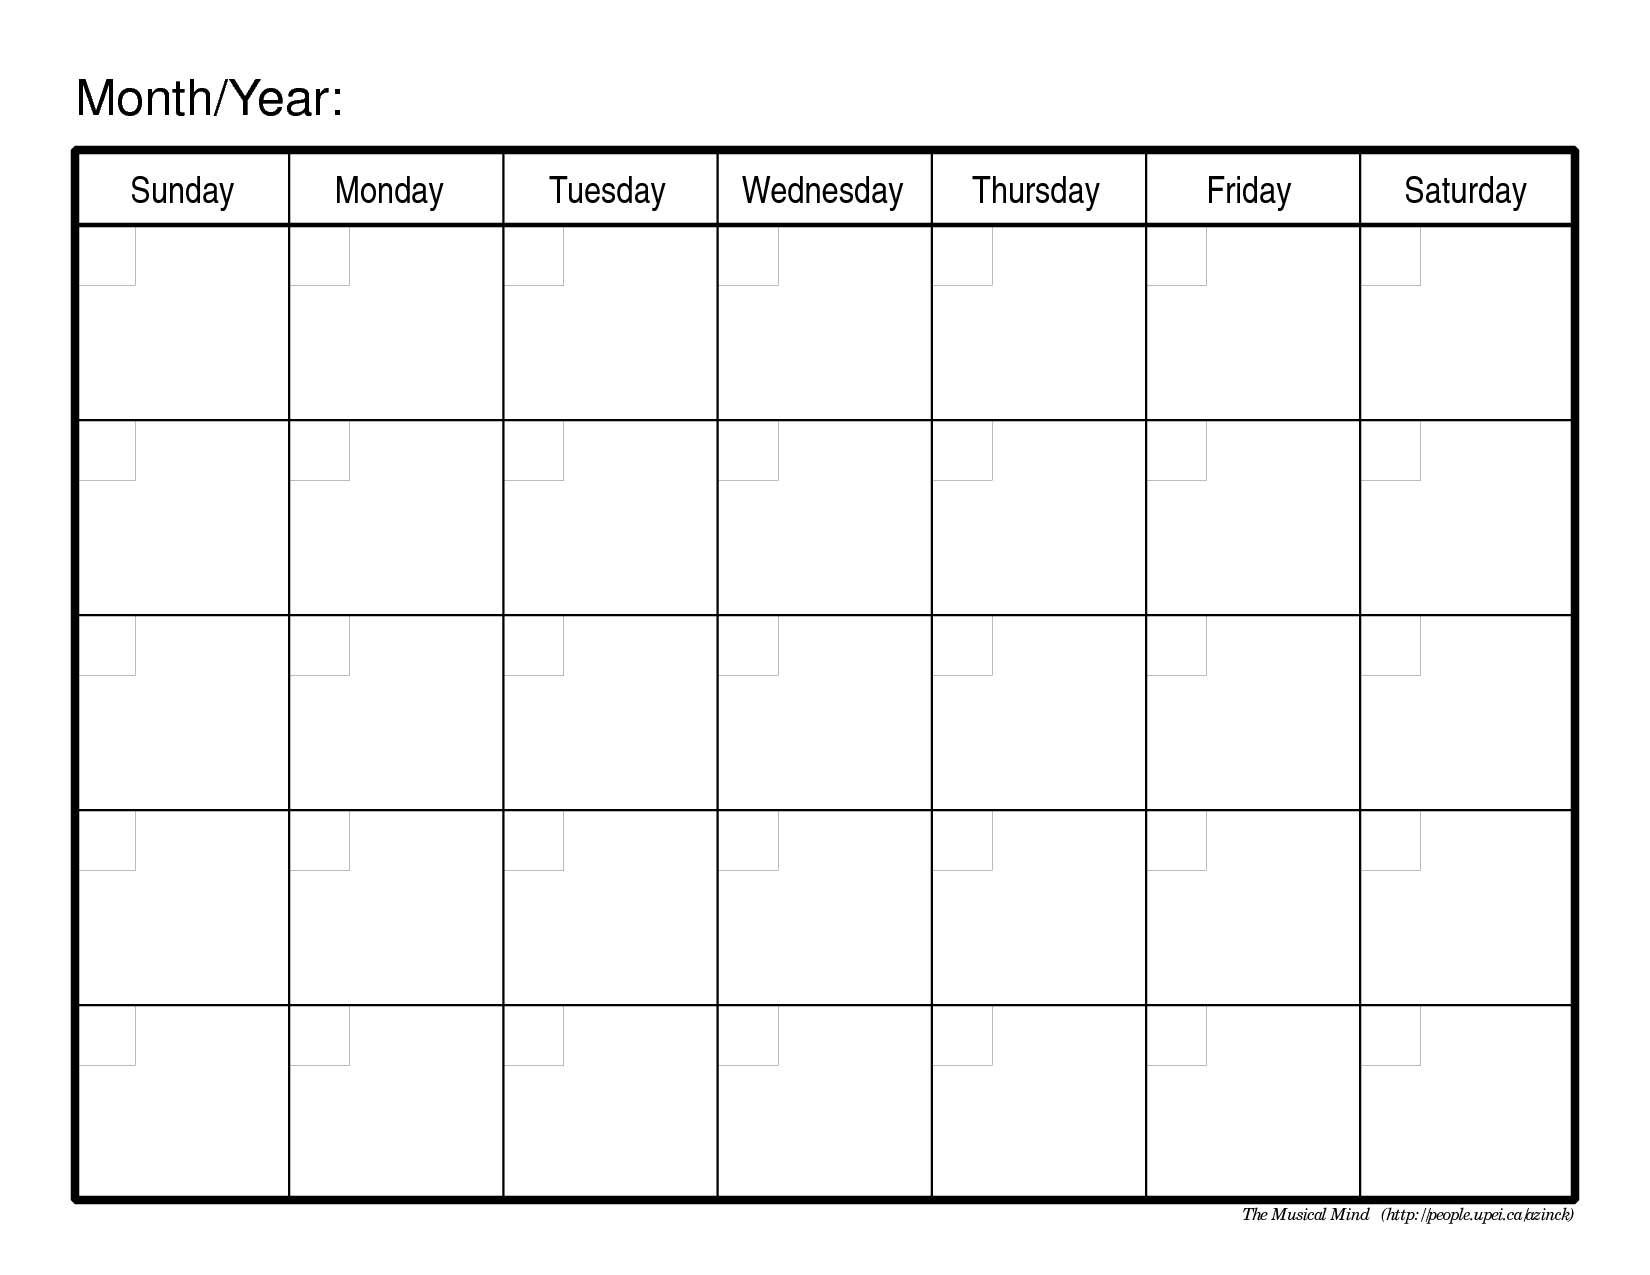 Monthly Calendar Template | Organizing | Monthly Calendar Template pertaining to Month To Month Calendar Printable